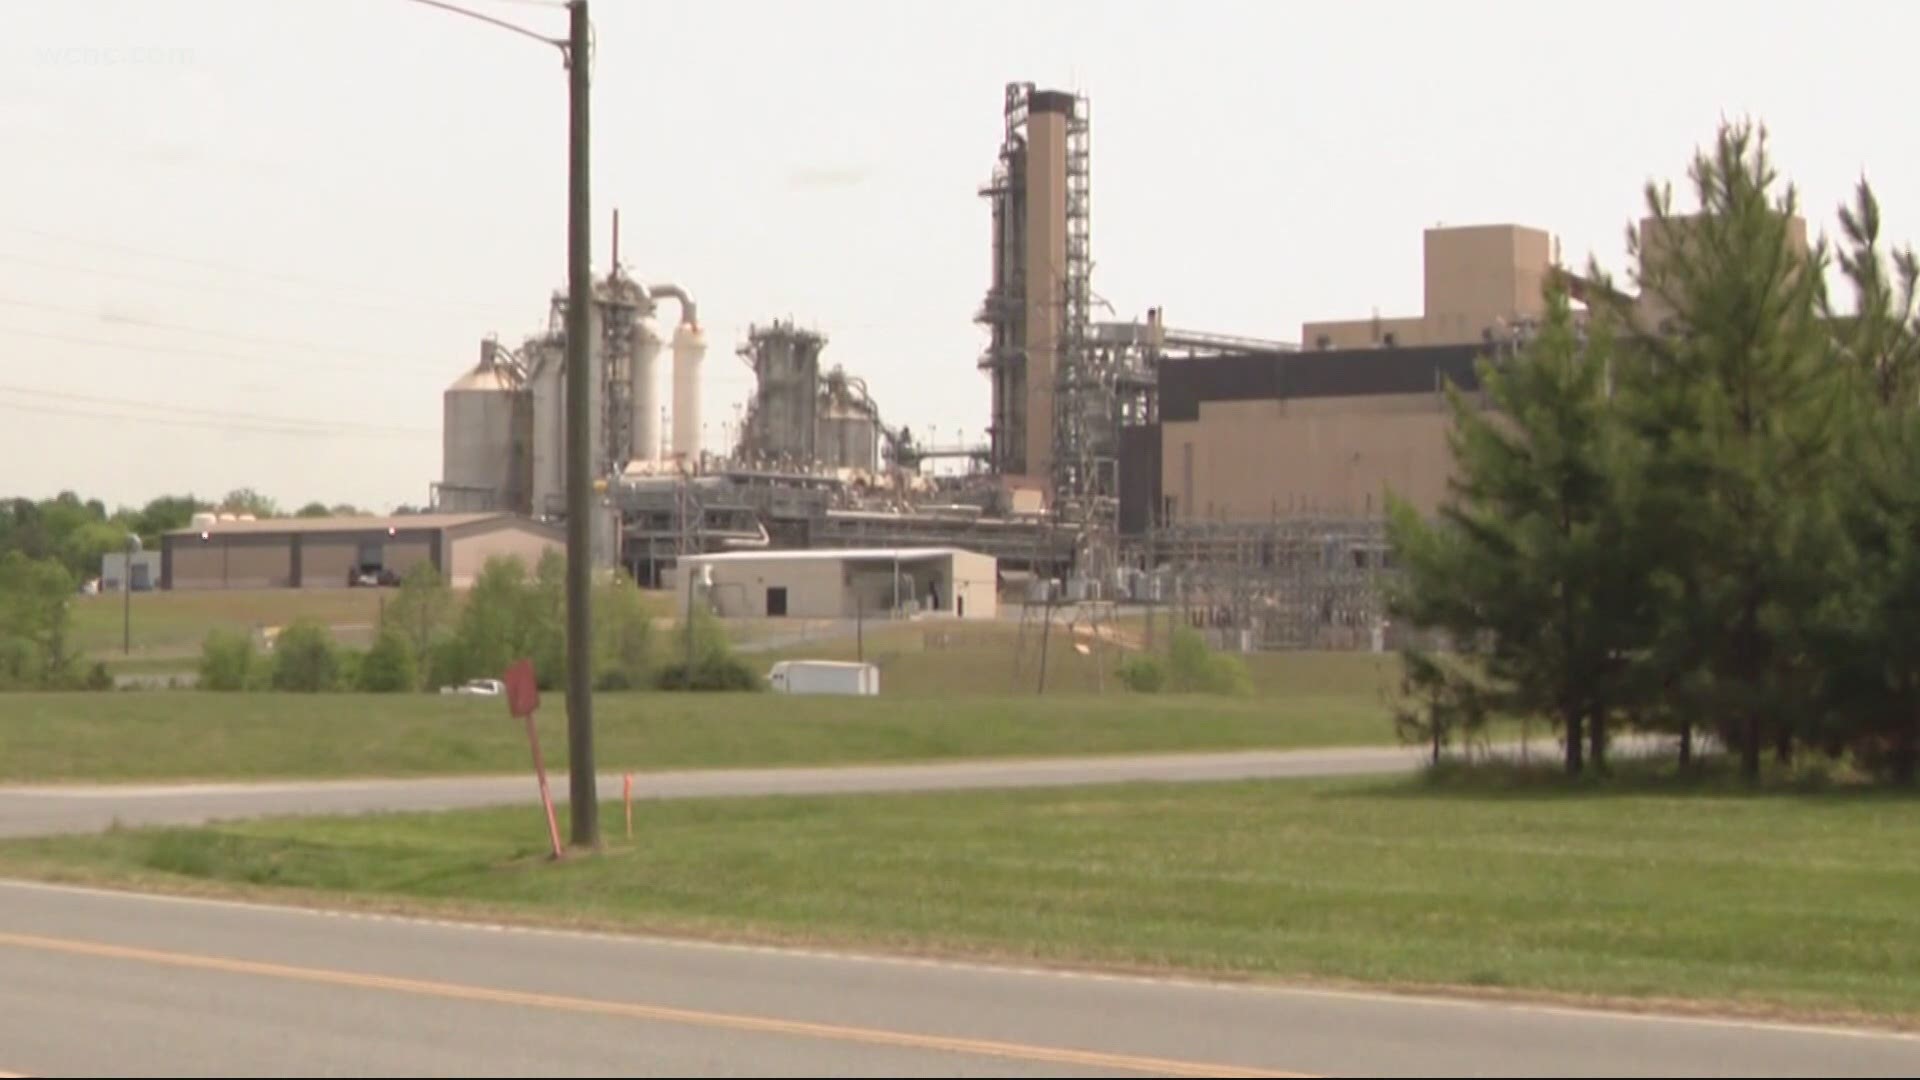 The lawsuit alleges New-Indy has been cutting environmental corners and releasing dangerous, noxious chemicals and pollutants into the air.